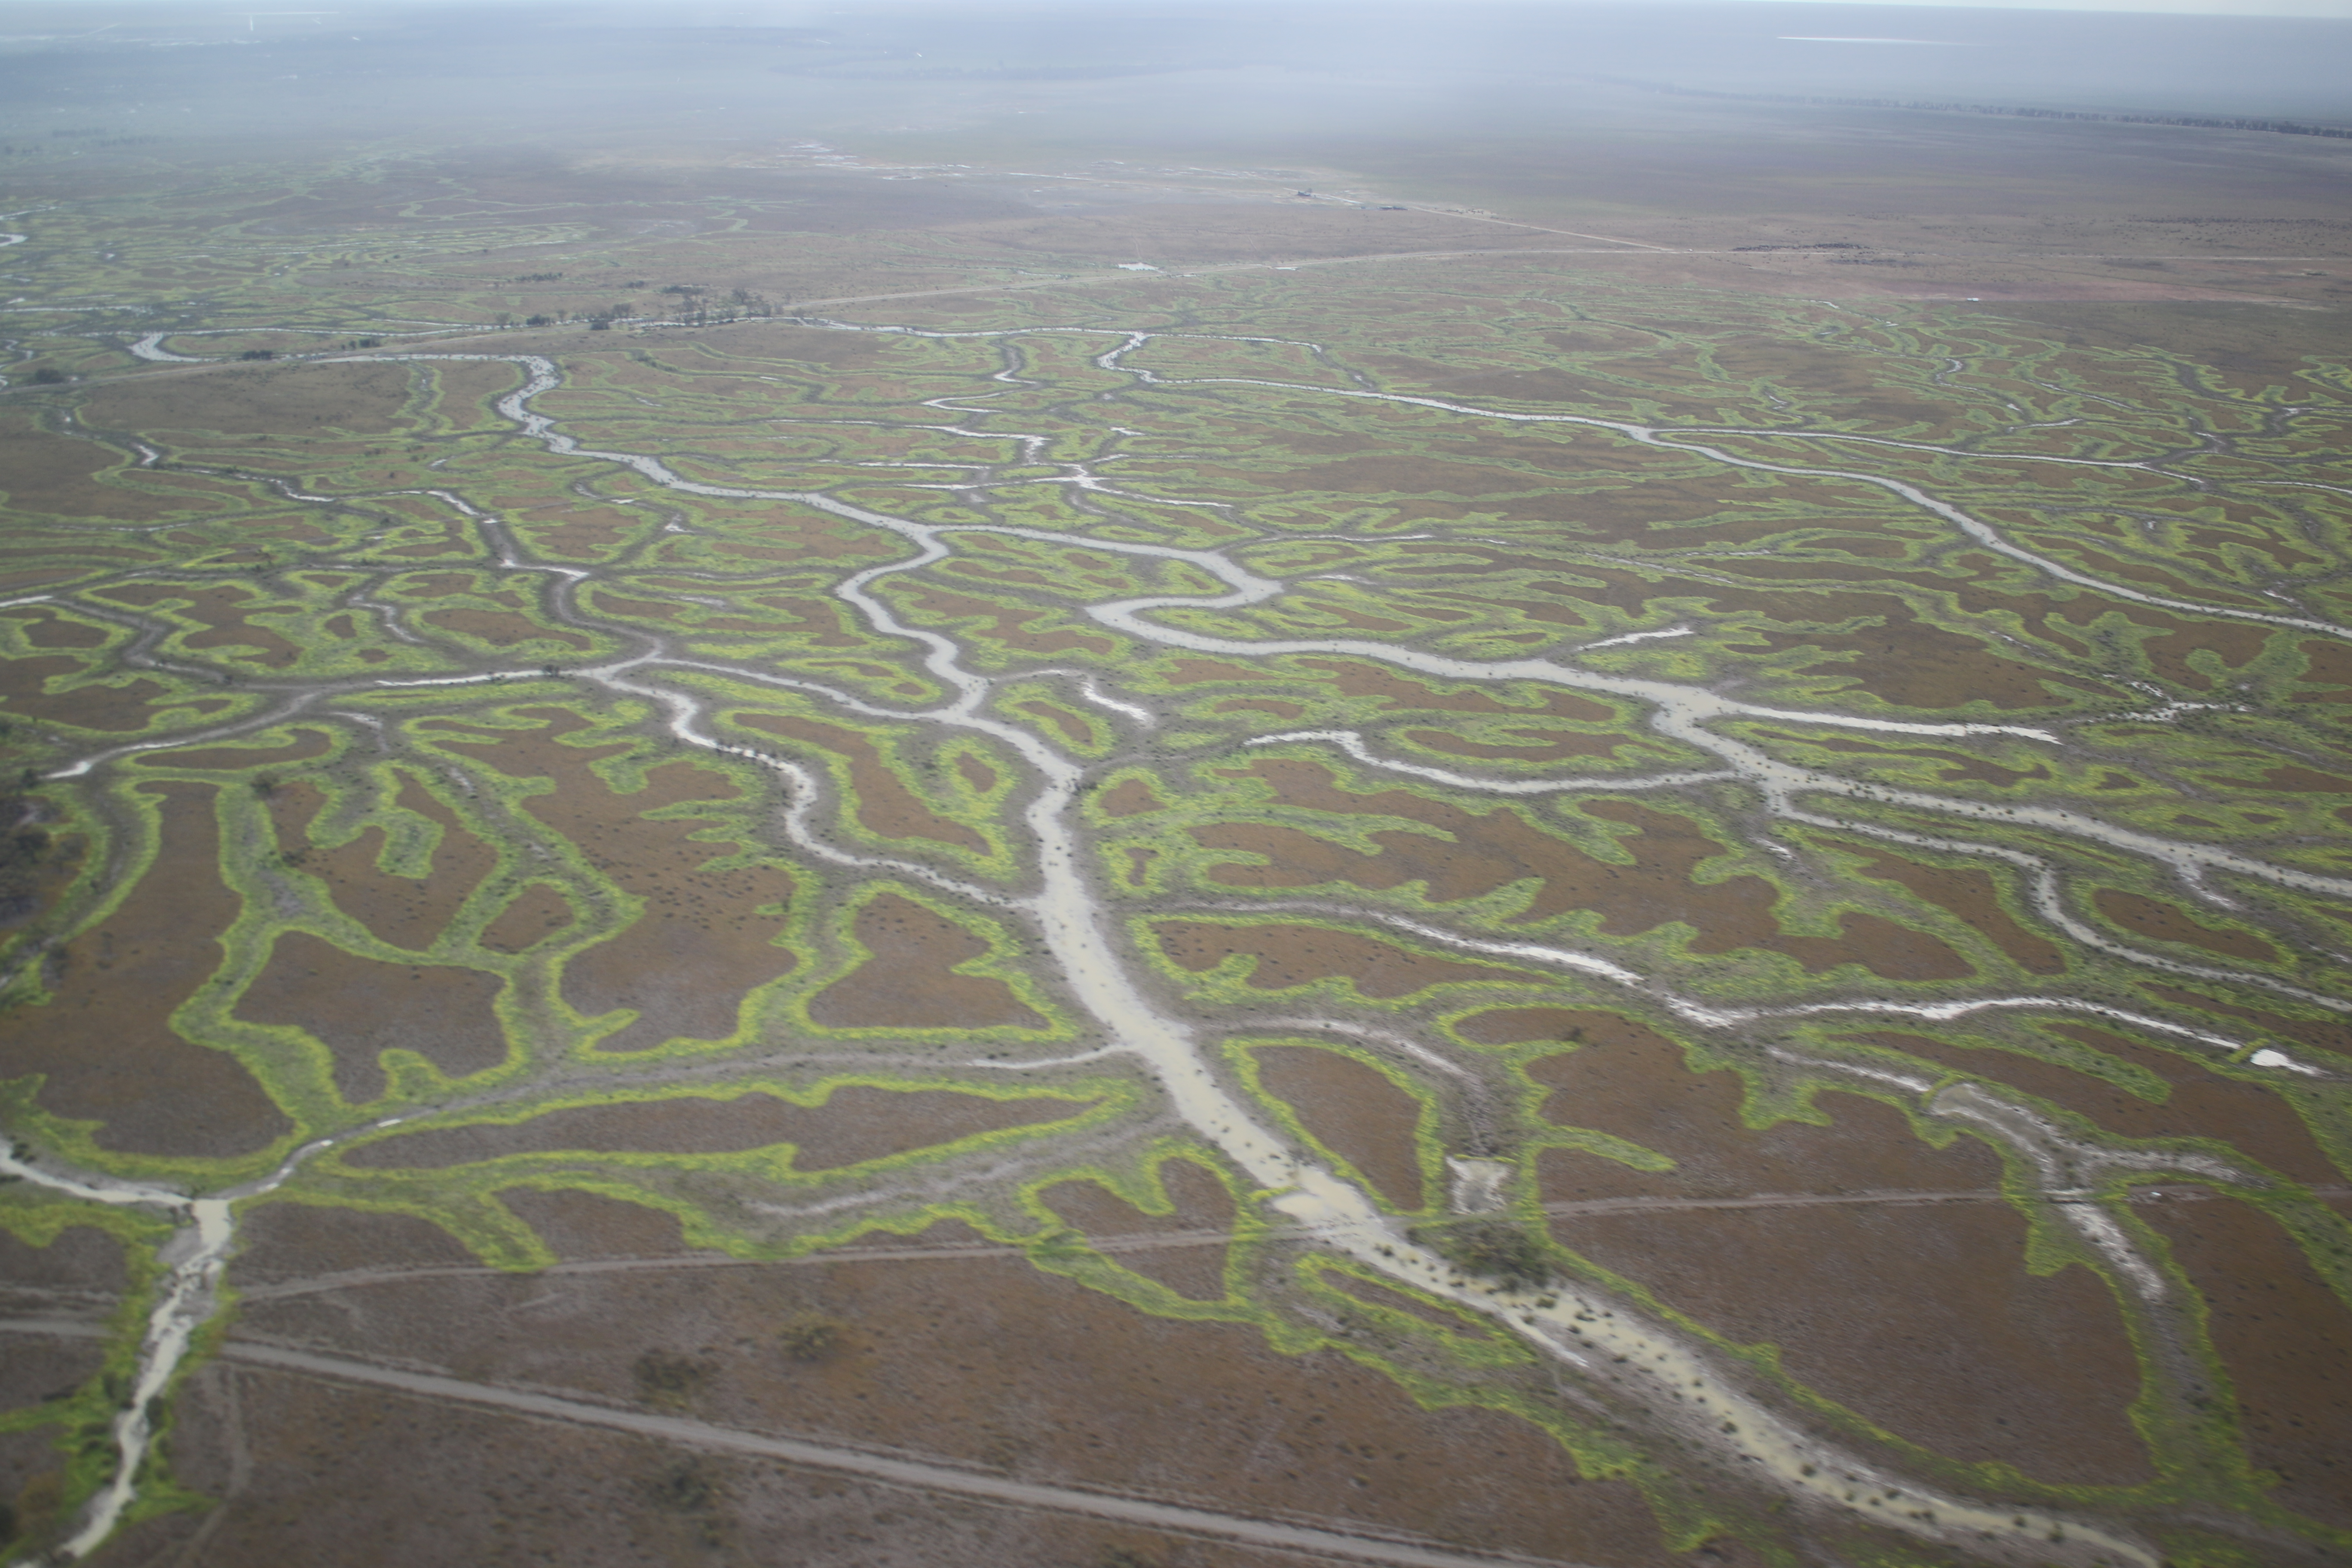 The fingers of green were dramatic as they spread across the Gayini wetlands